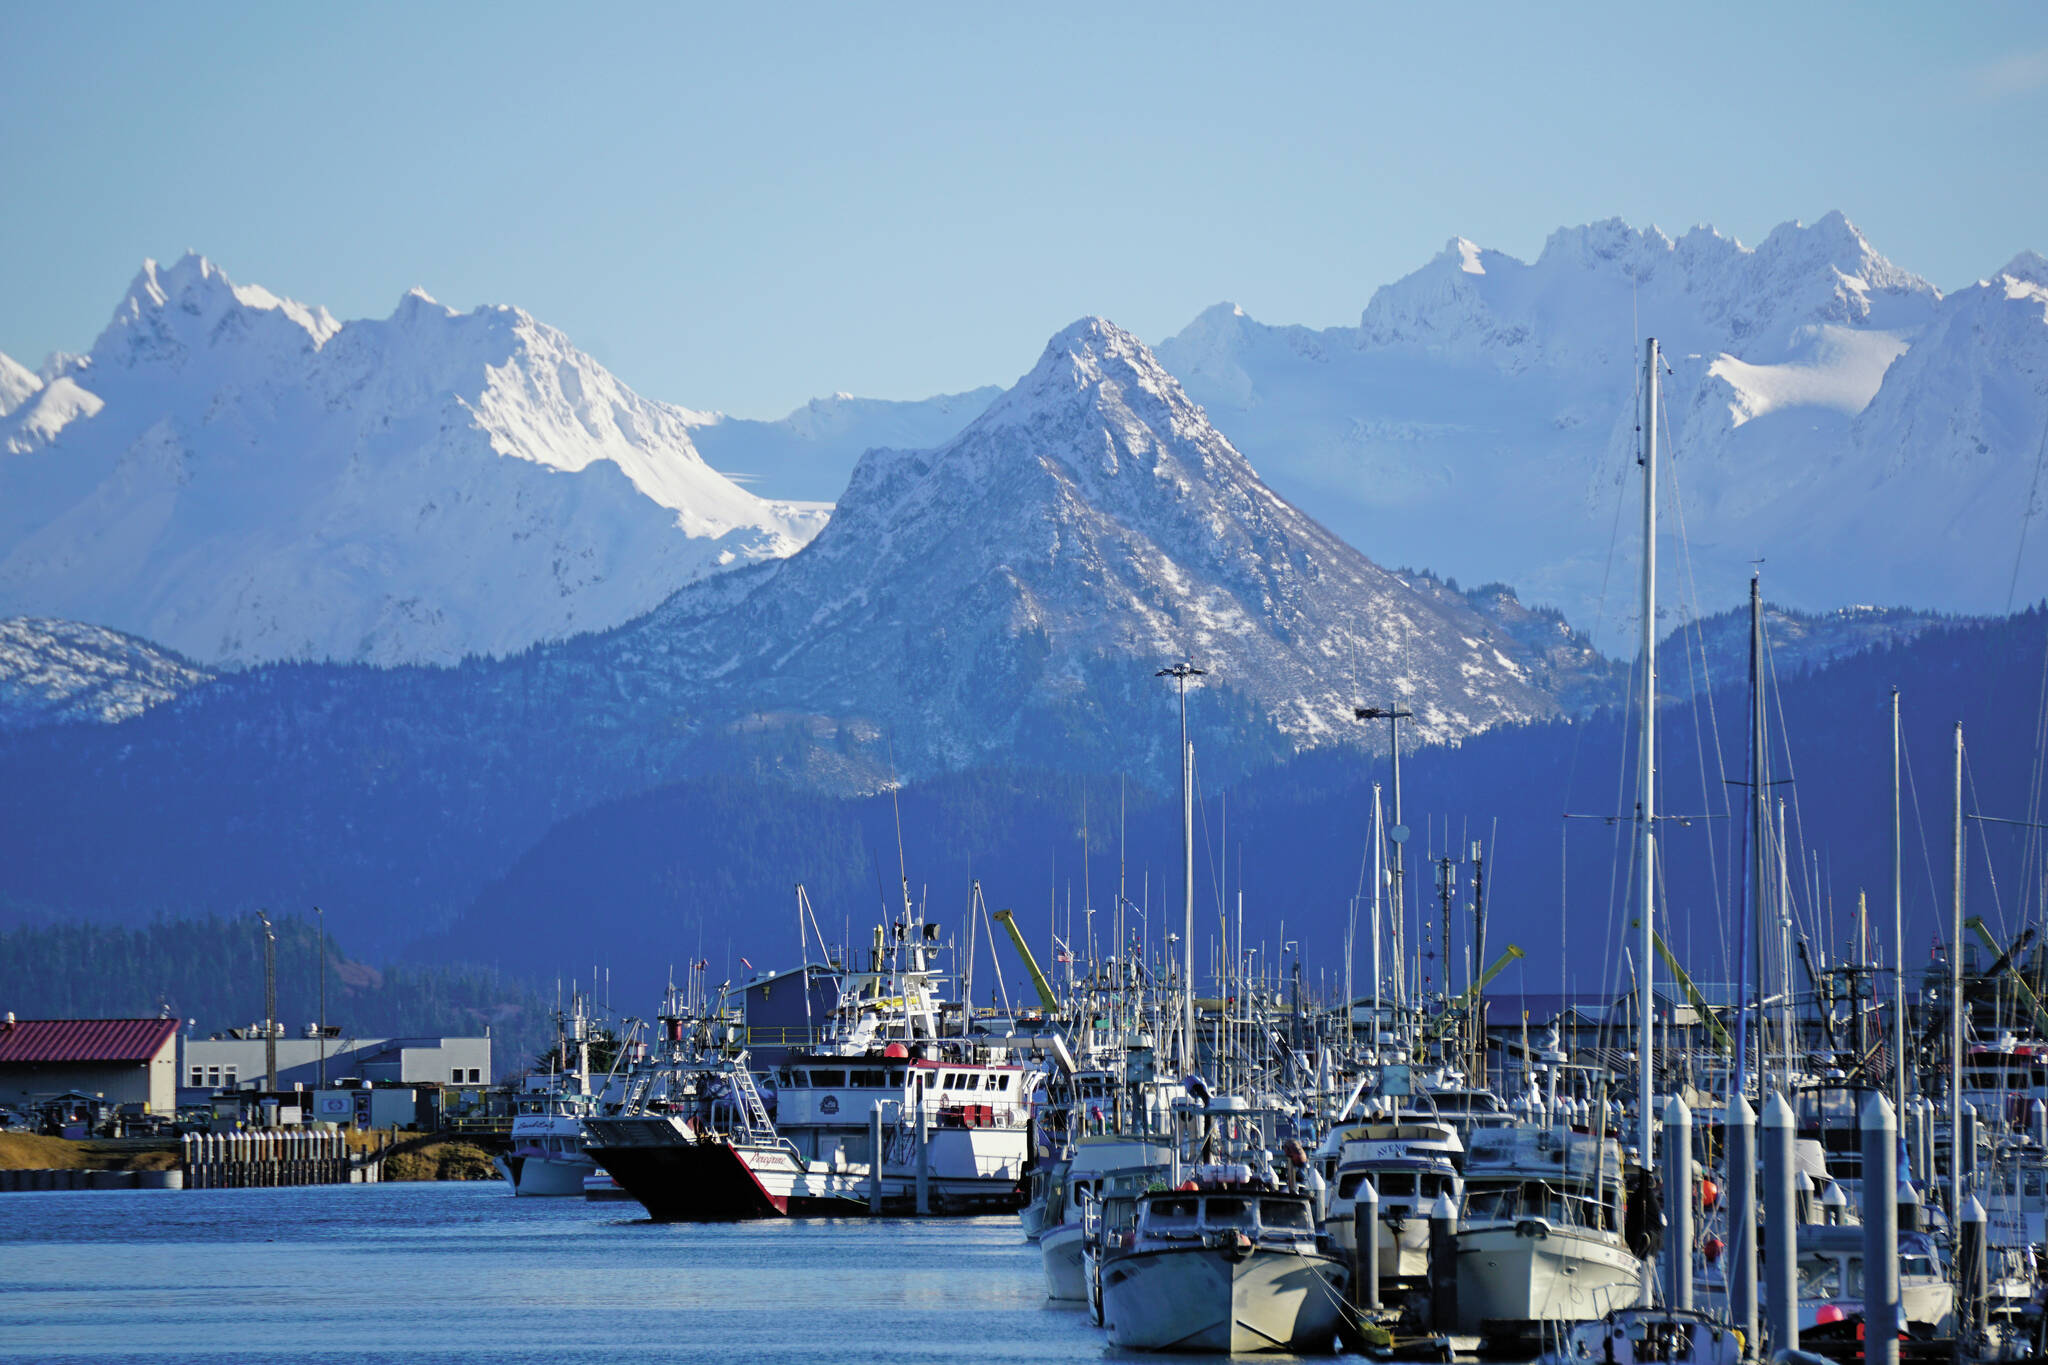 The Homer Harbor, as seen on Friday, Nov. 5, 2021, in Homer, Alaska. (Photo by Michael Armstrong/Homer News)